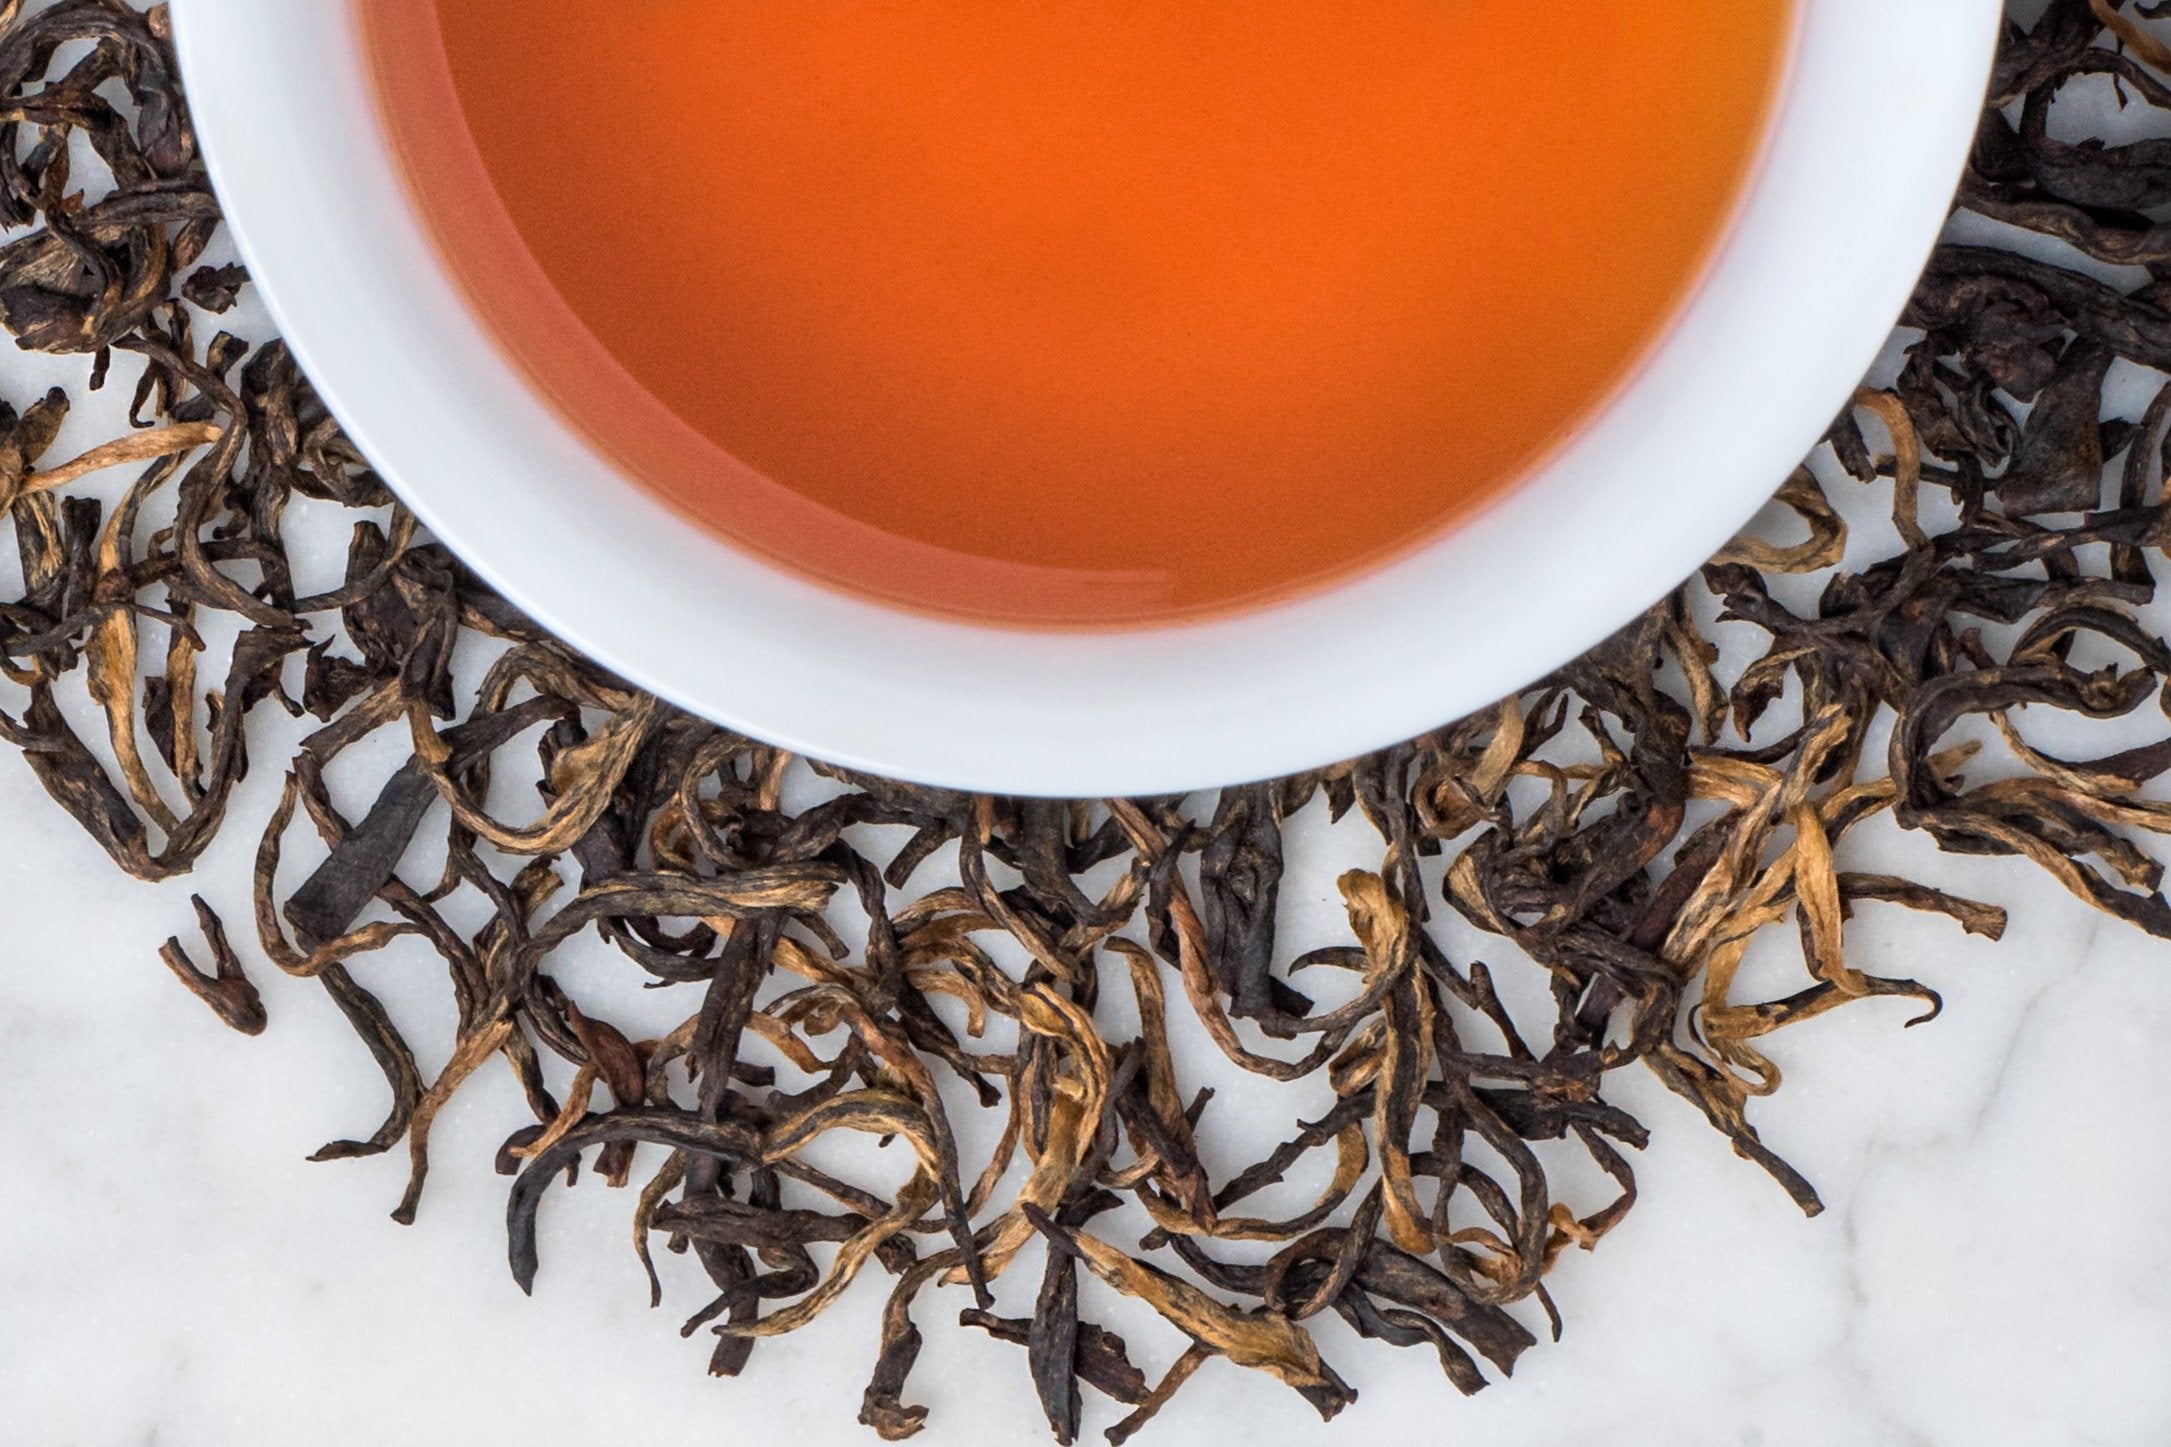 Black Leaves Twisted With Golden Buds Surround A Cup of Perfectly Steeped Yunnan Black Tea